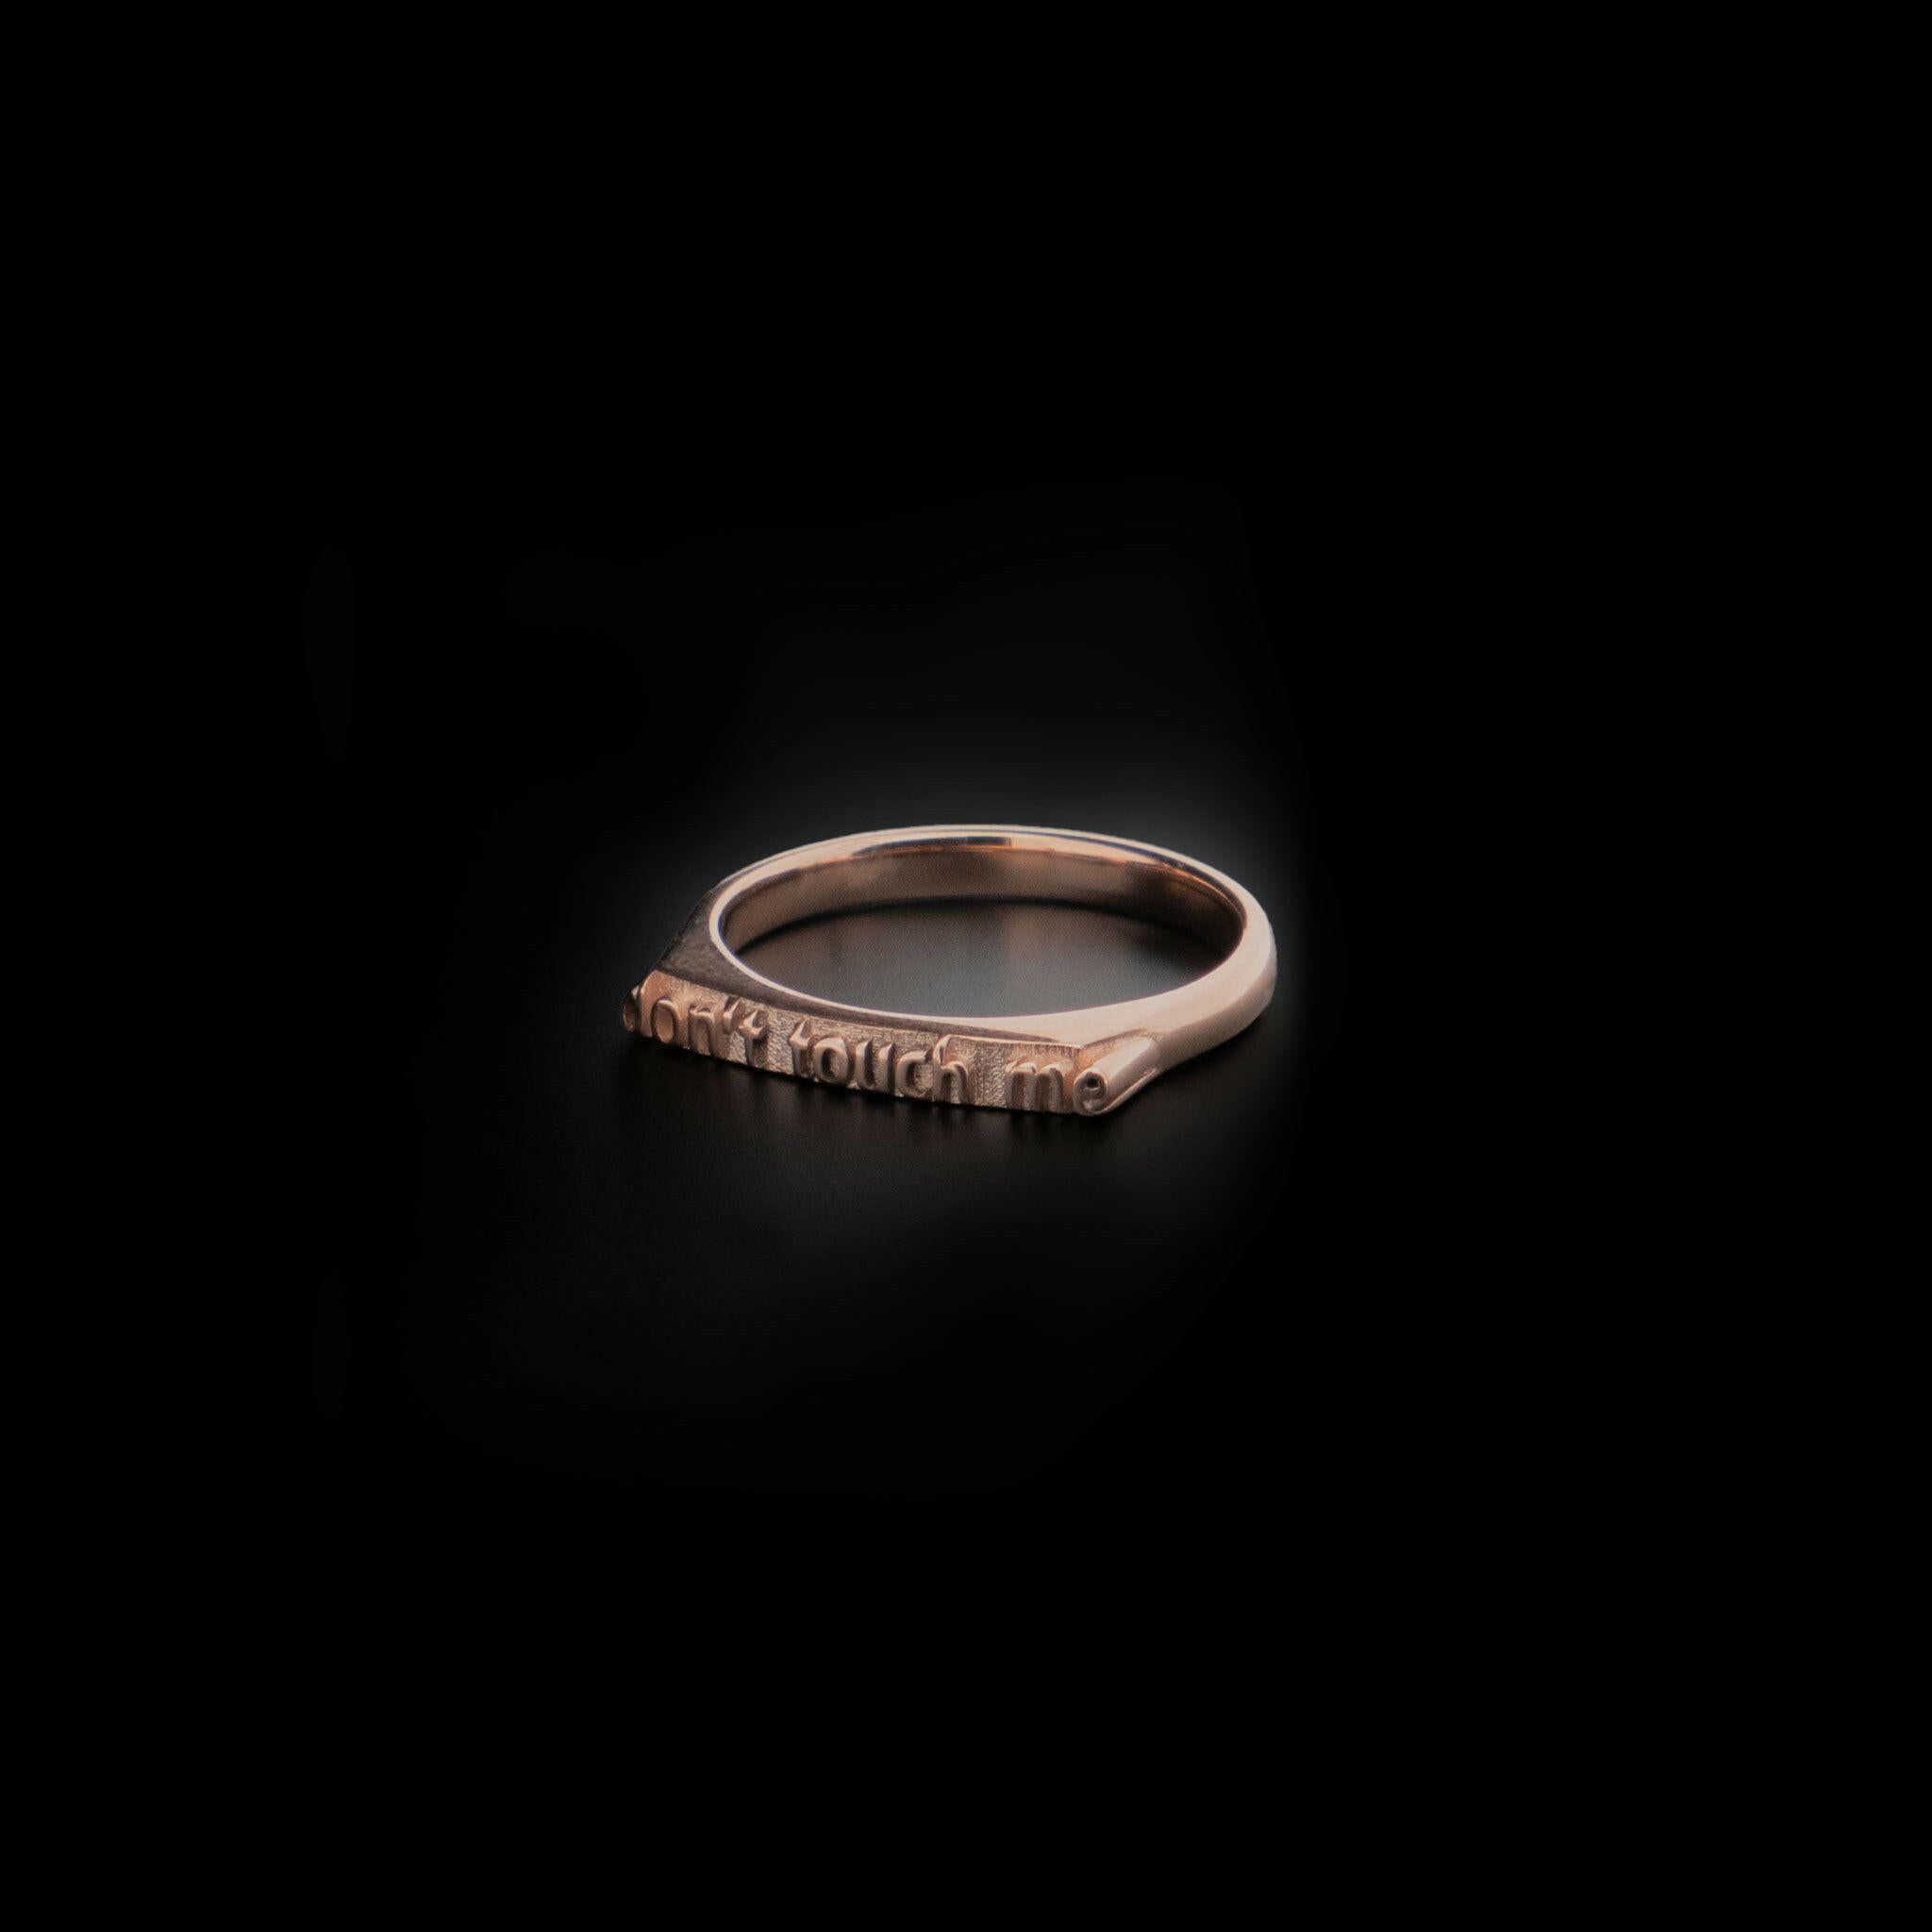 right angled 14 Karat rose gold ring with text that reads "don't touch me"